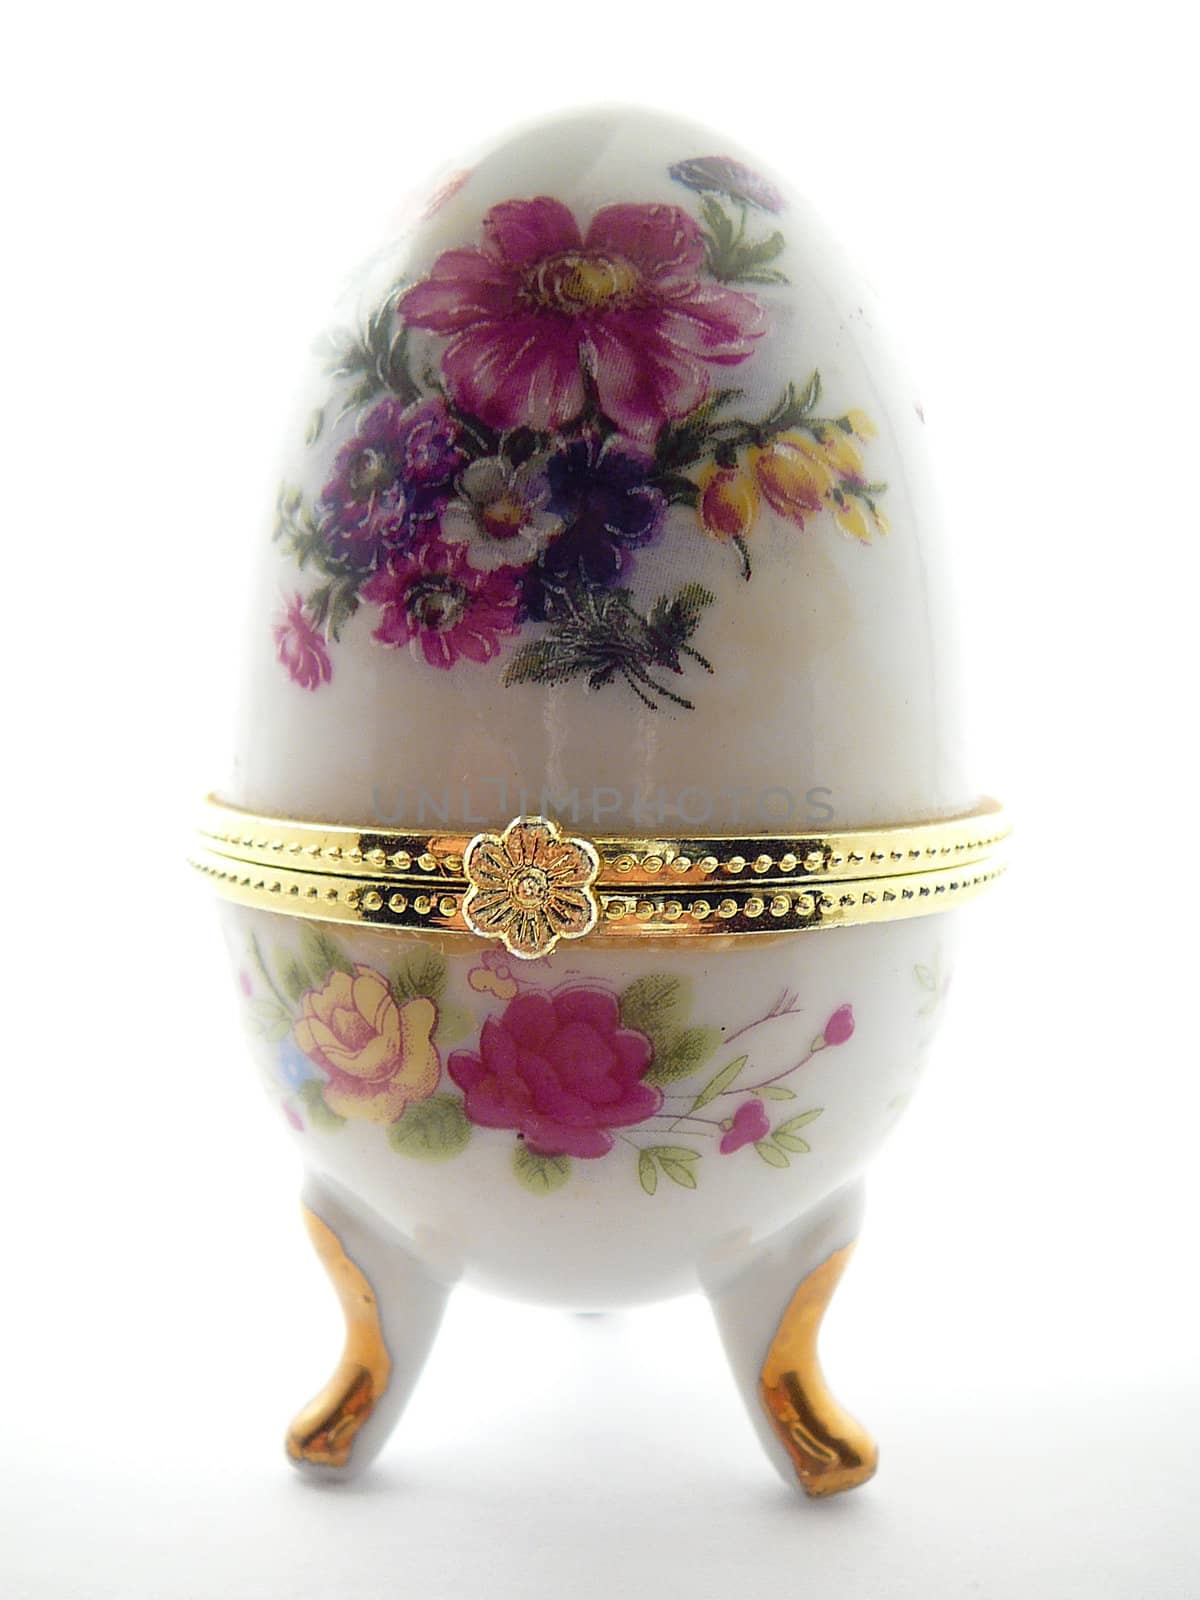 decorated egg with flowers on the white background